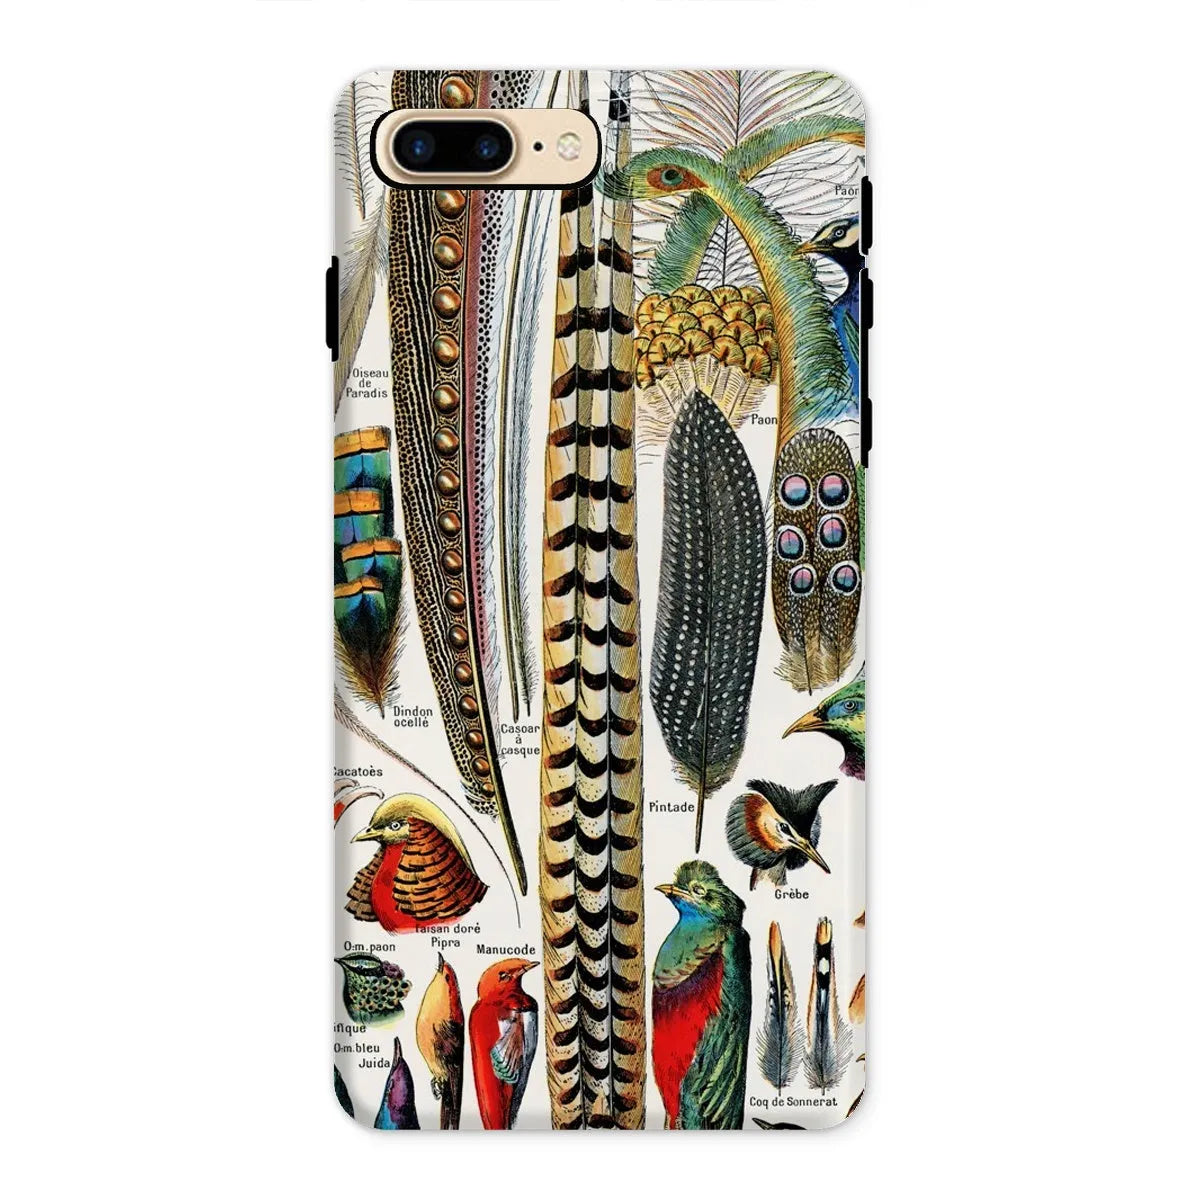 Plumes - Feathers - Adolphe Millot Tough Phone Case - Iphone 8 Plus / Matte - Mobile Phone Cases - Aesthetic Art